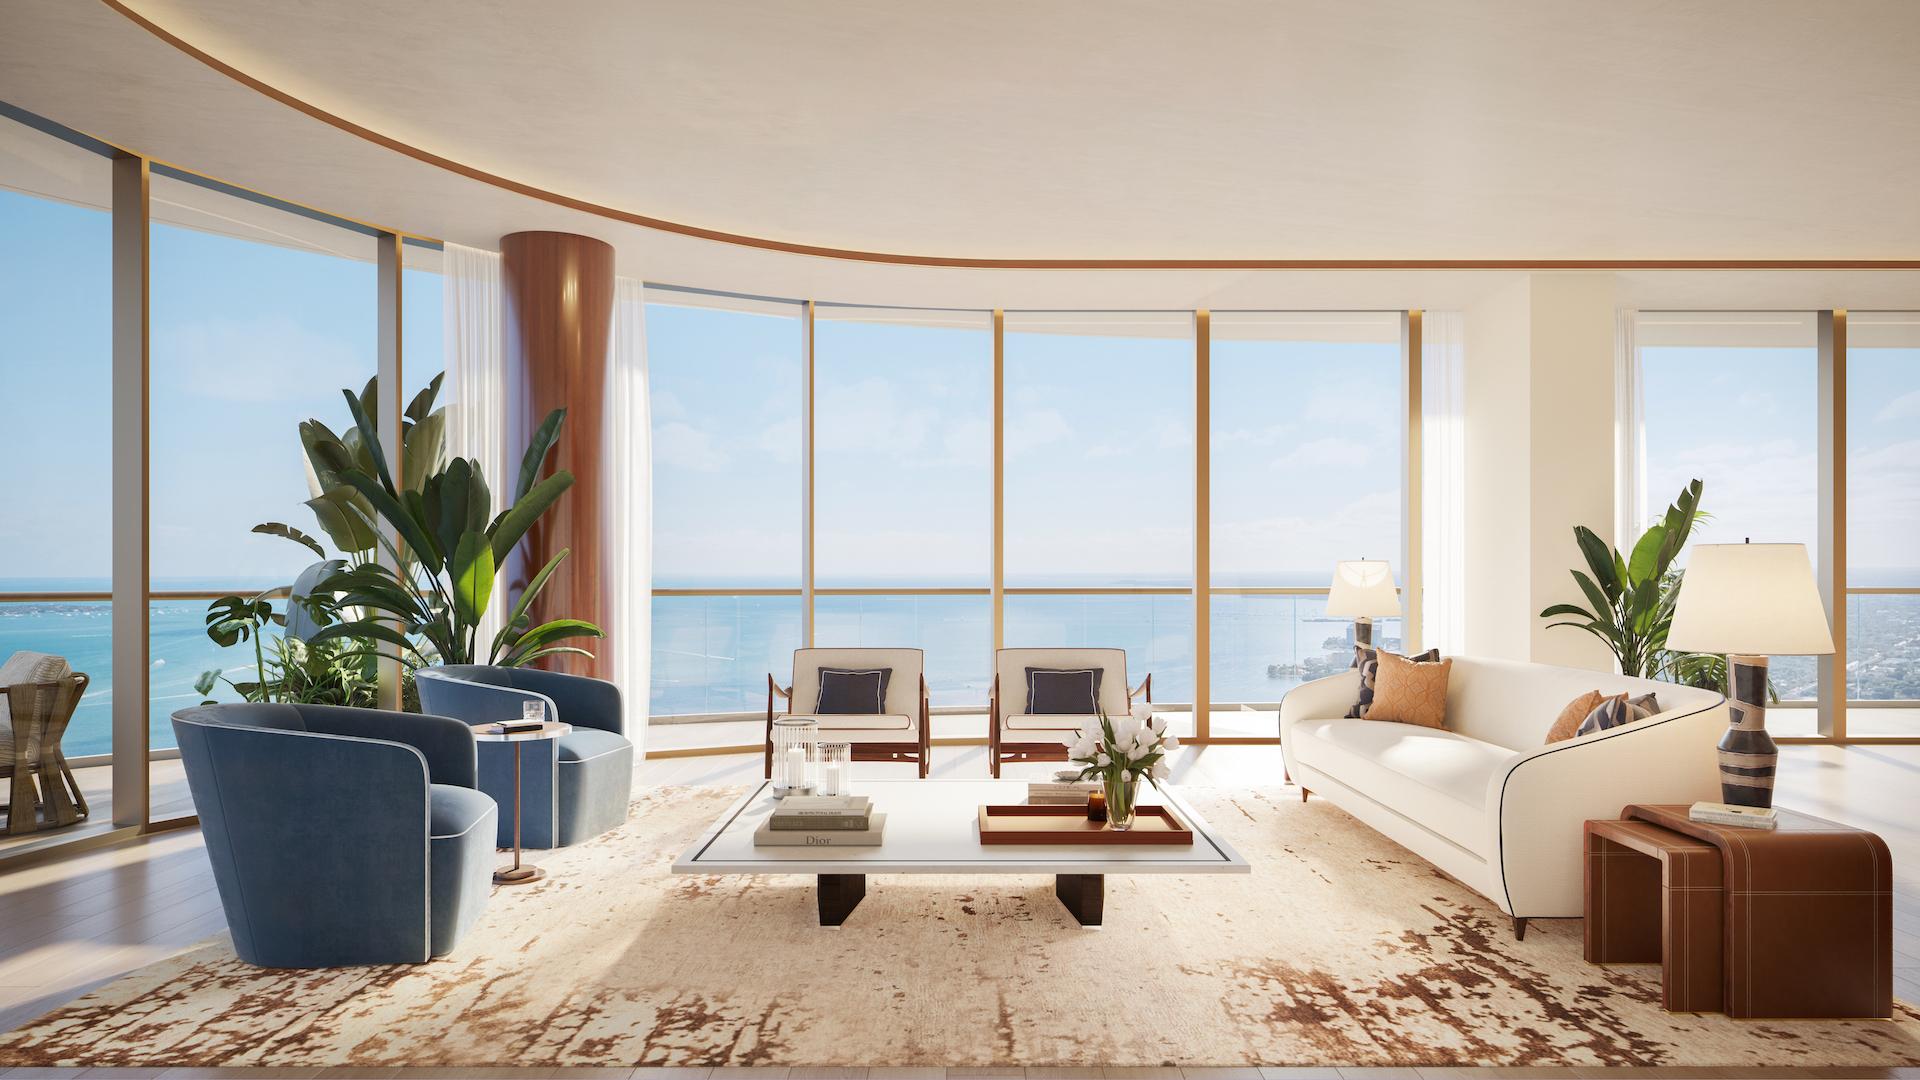 Timeless Italian Style: First Look at Cipriani’s Debut Residence in Miami